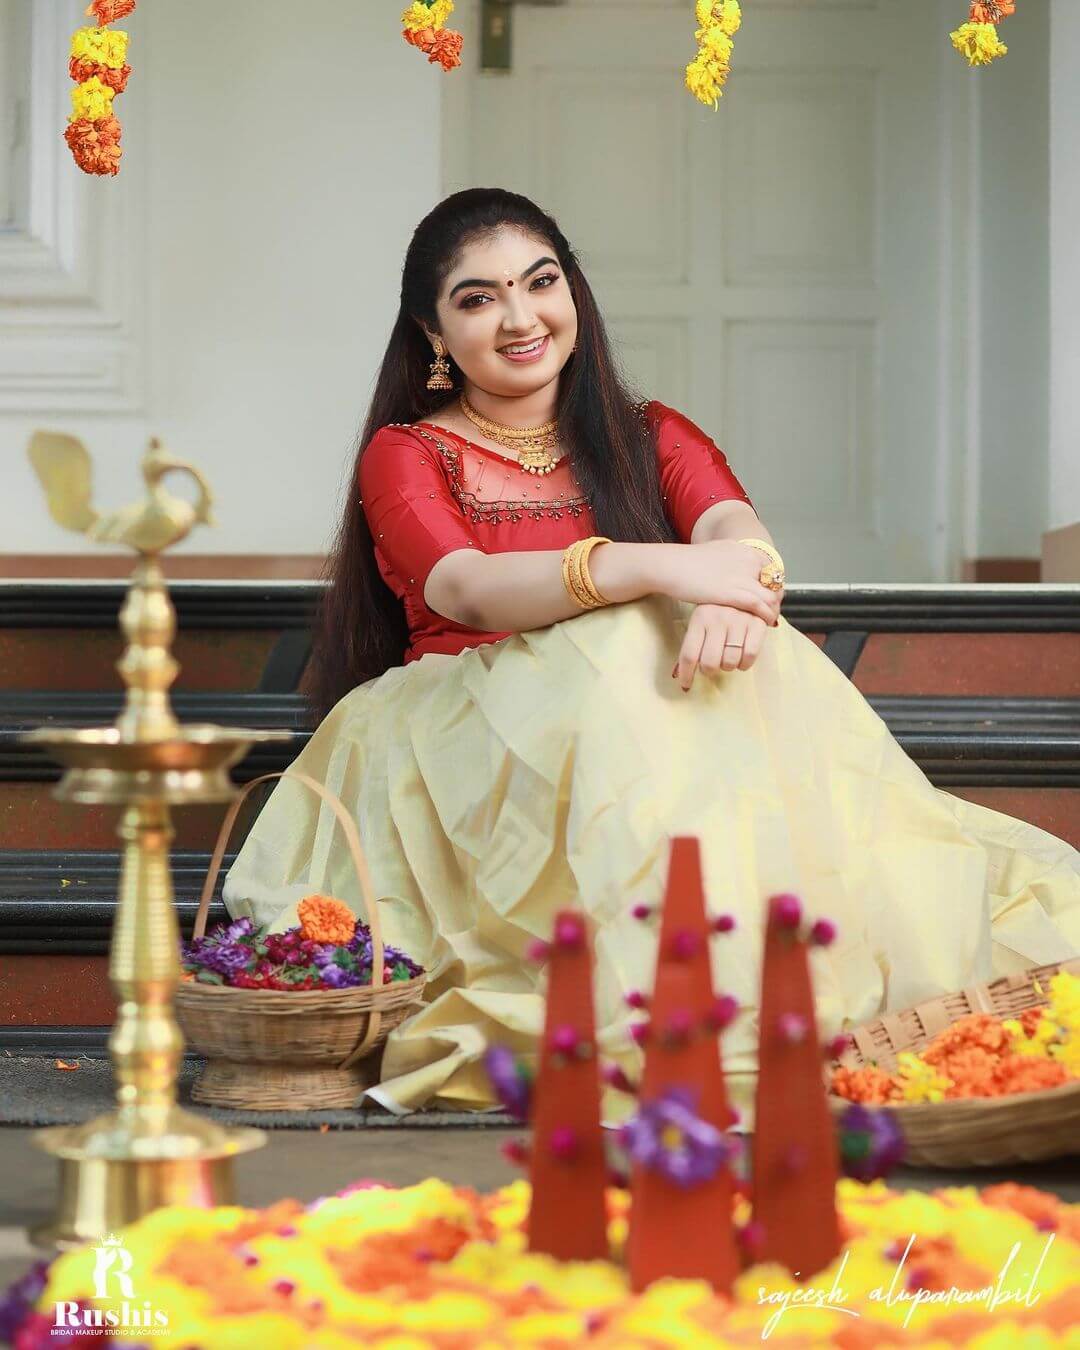 Malavika Nair Look Pretty In Red Blouse With Cream Skirt Outfit Malavika Nair Traditional Outfit And Looks